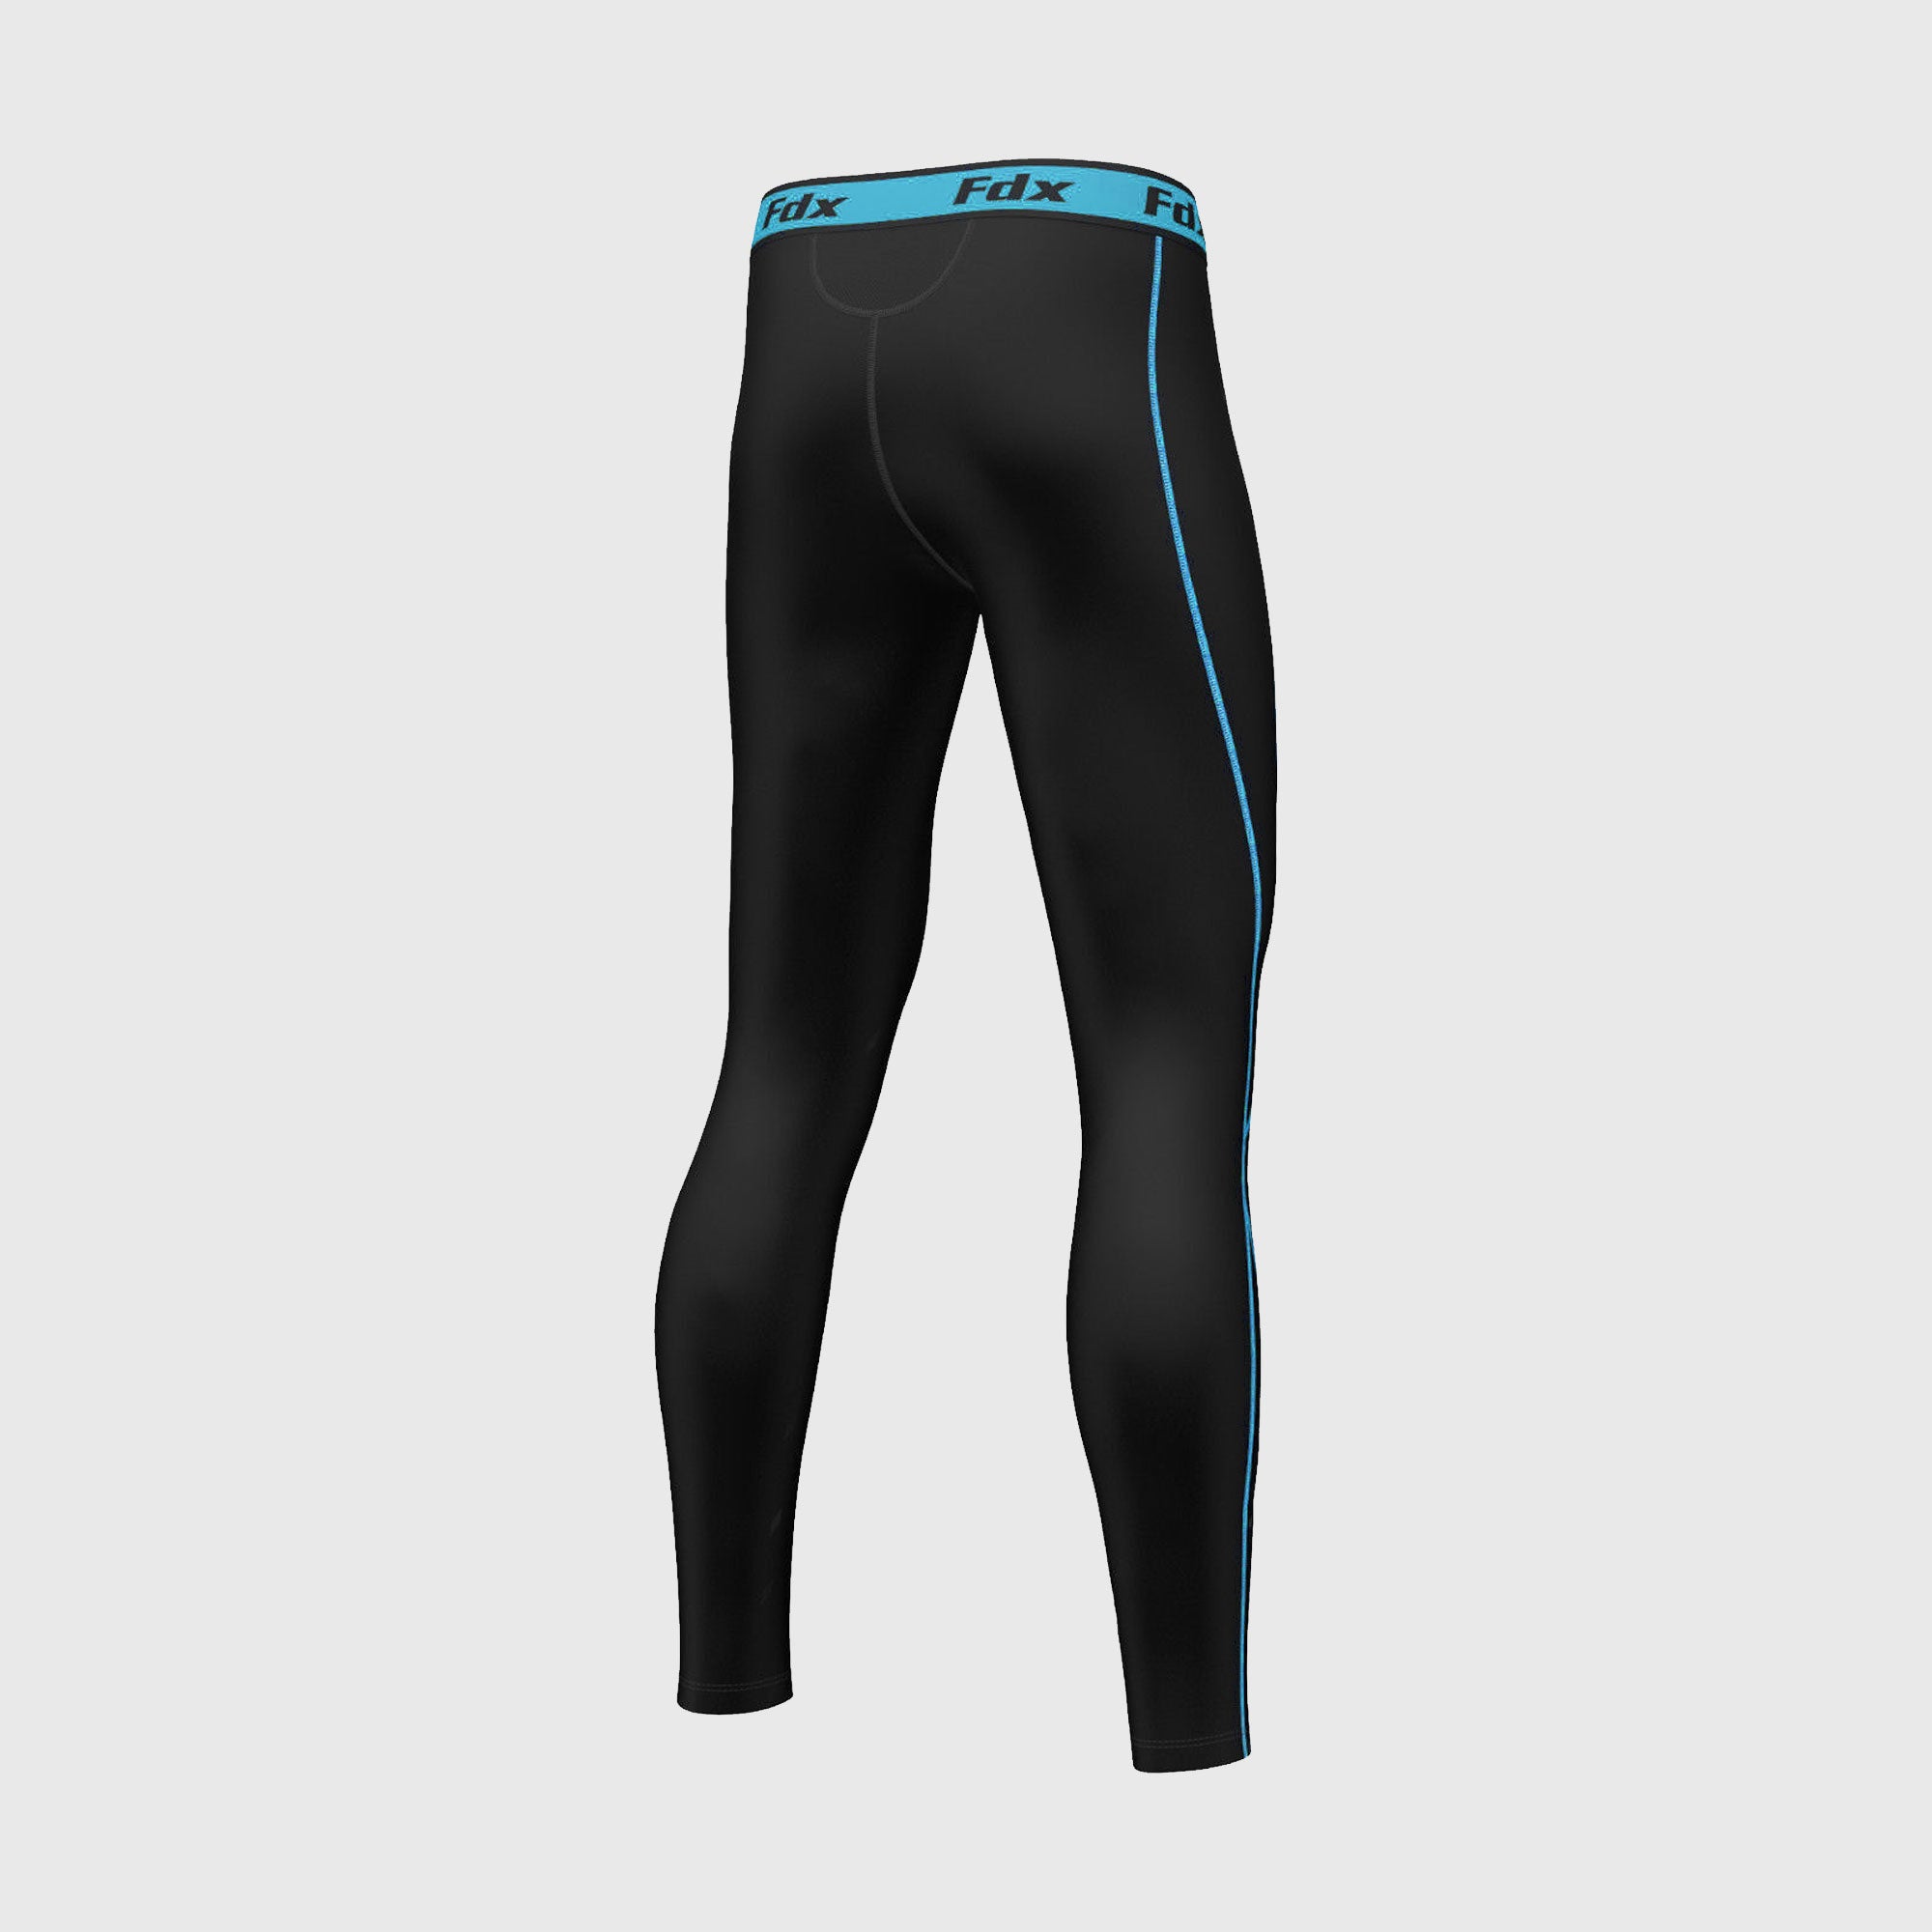 Fdx Blitz Men's All Weather Compression Tights Grey, Blue, Red